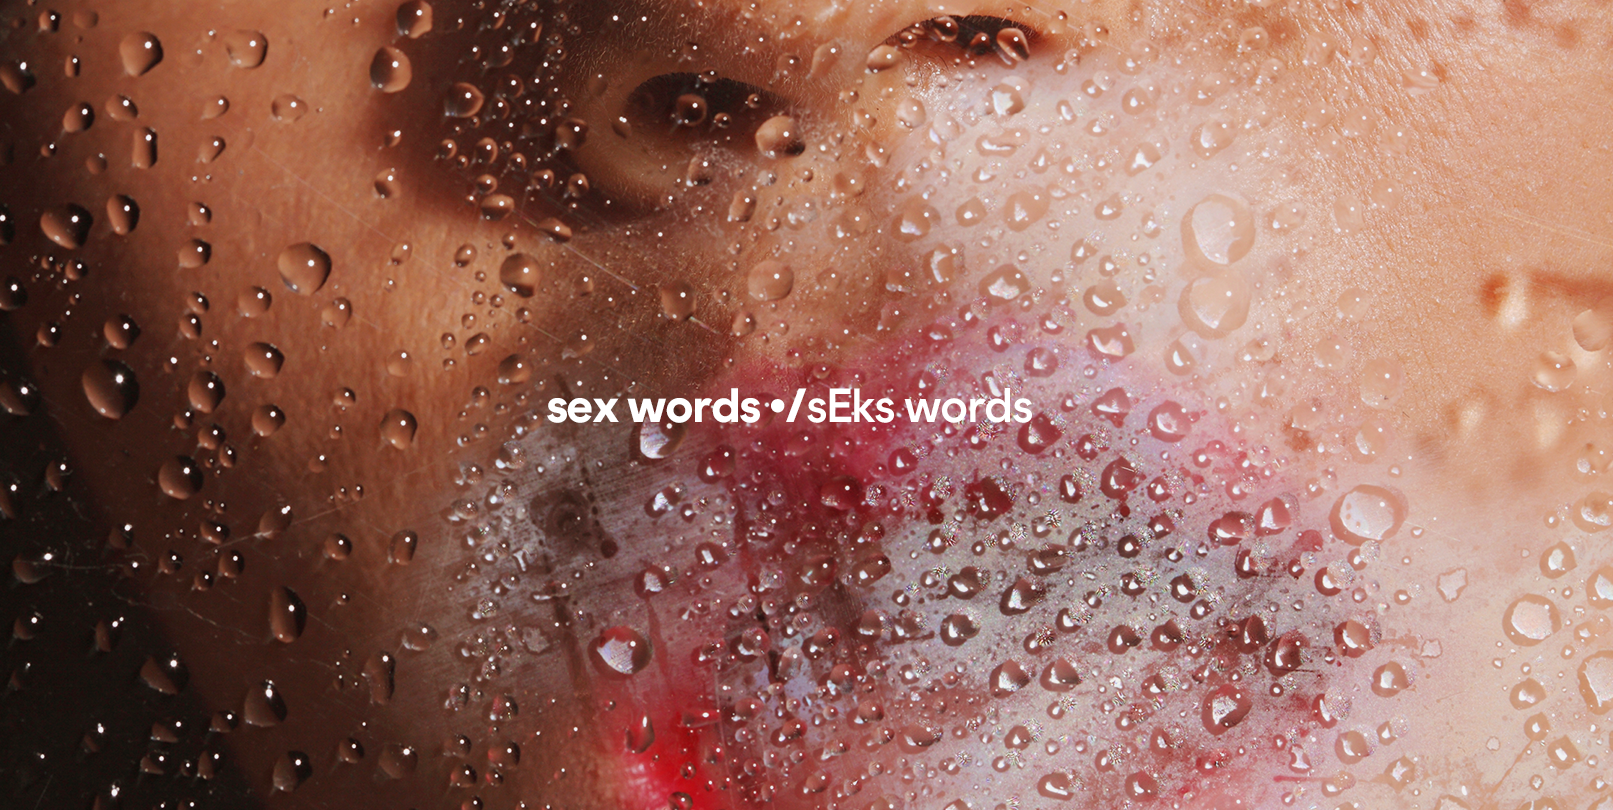 Drunk Passed Out Cum On Tits - 111 Sex Words to Know - Sex Slang Glossary and Lingo Definitions